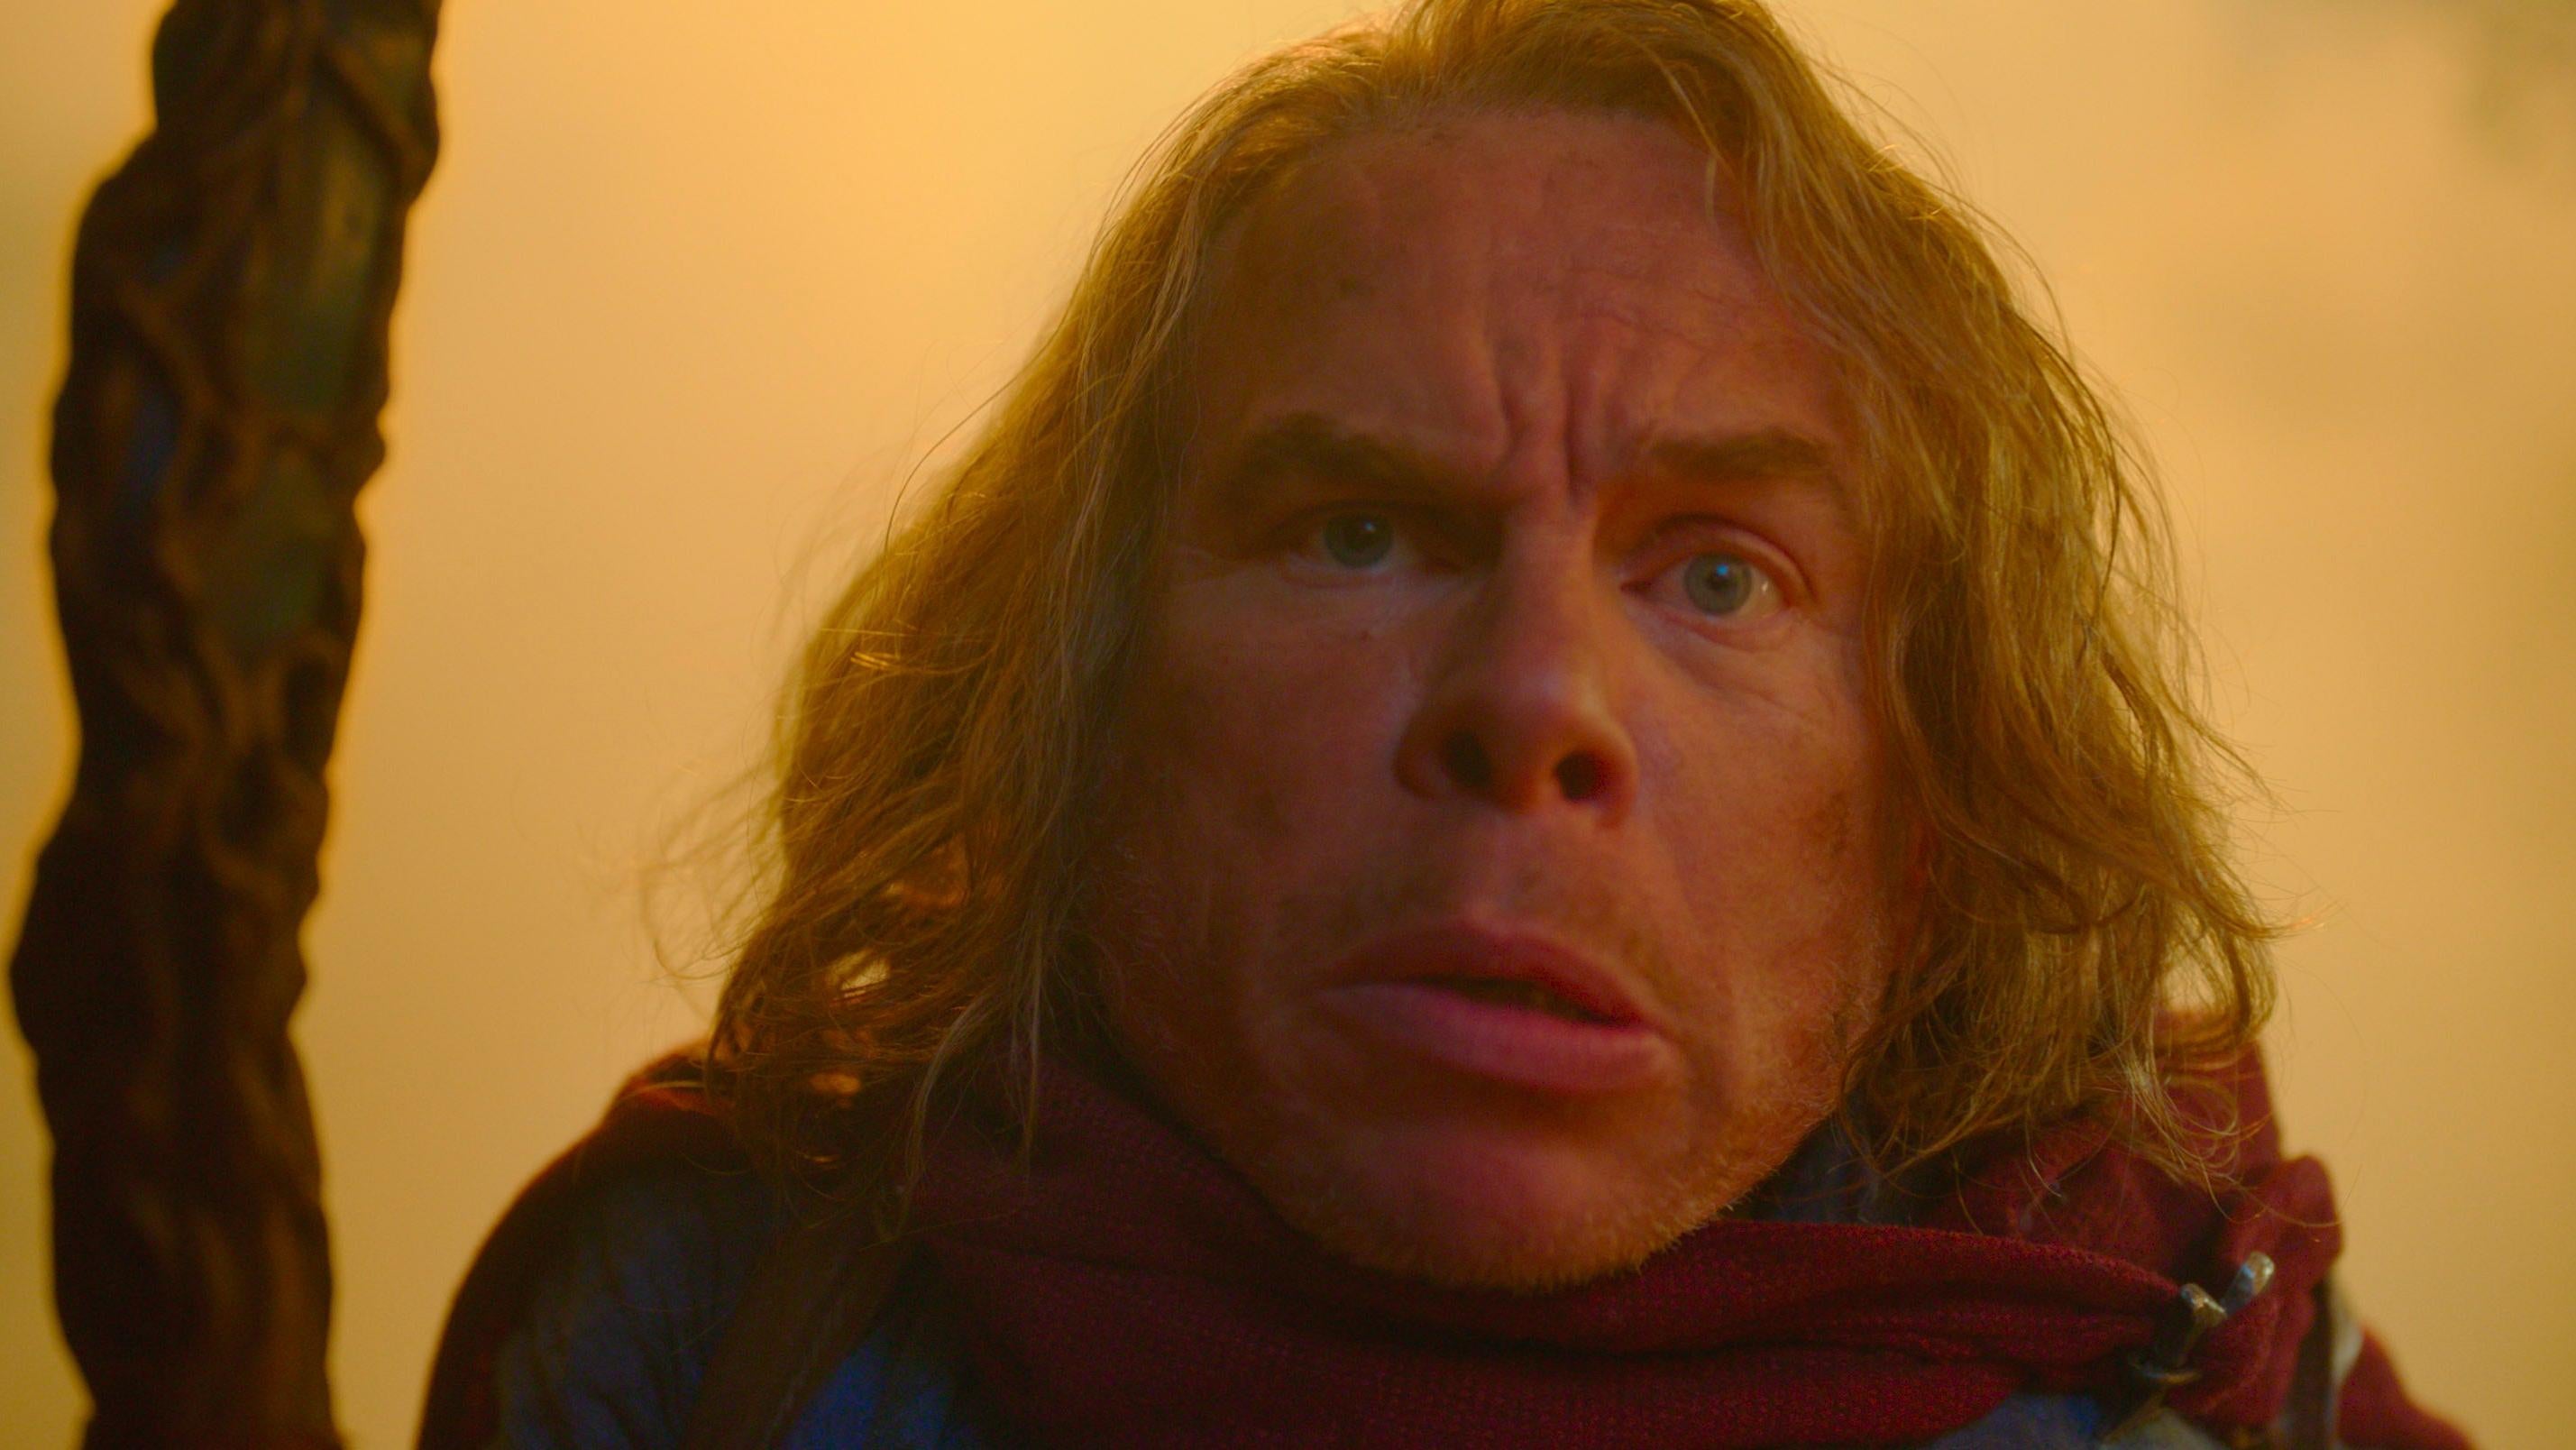 Willow as played by Warwick Davis. (Image: Lucasfilm)